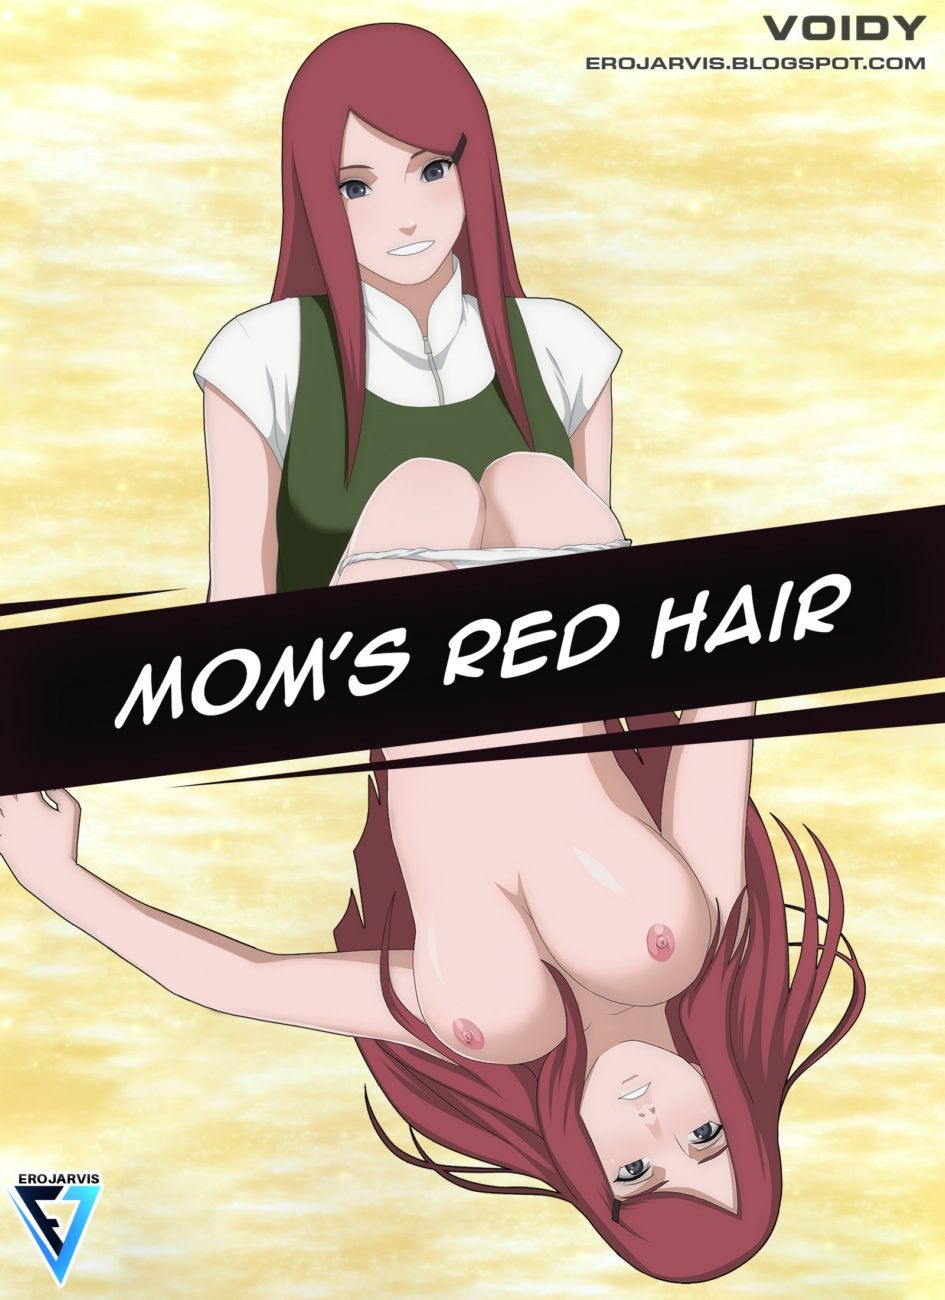 [Erojarvis] Mom's Red Hair (Naruto) 1